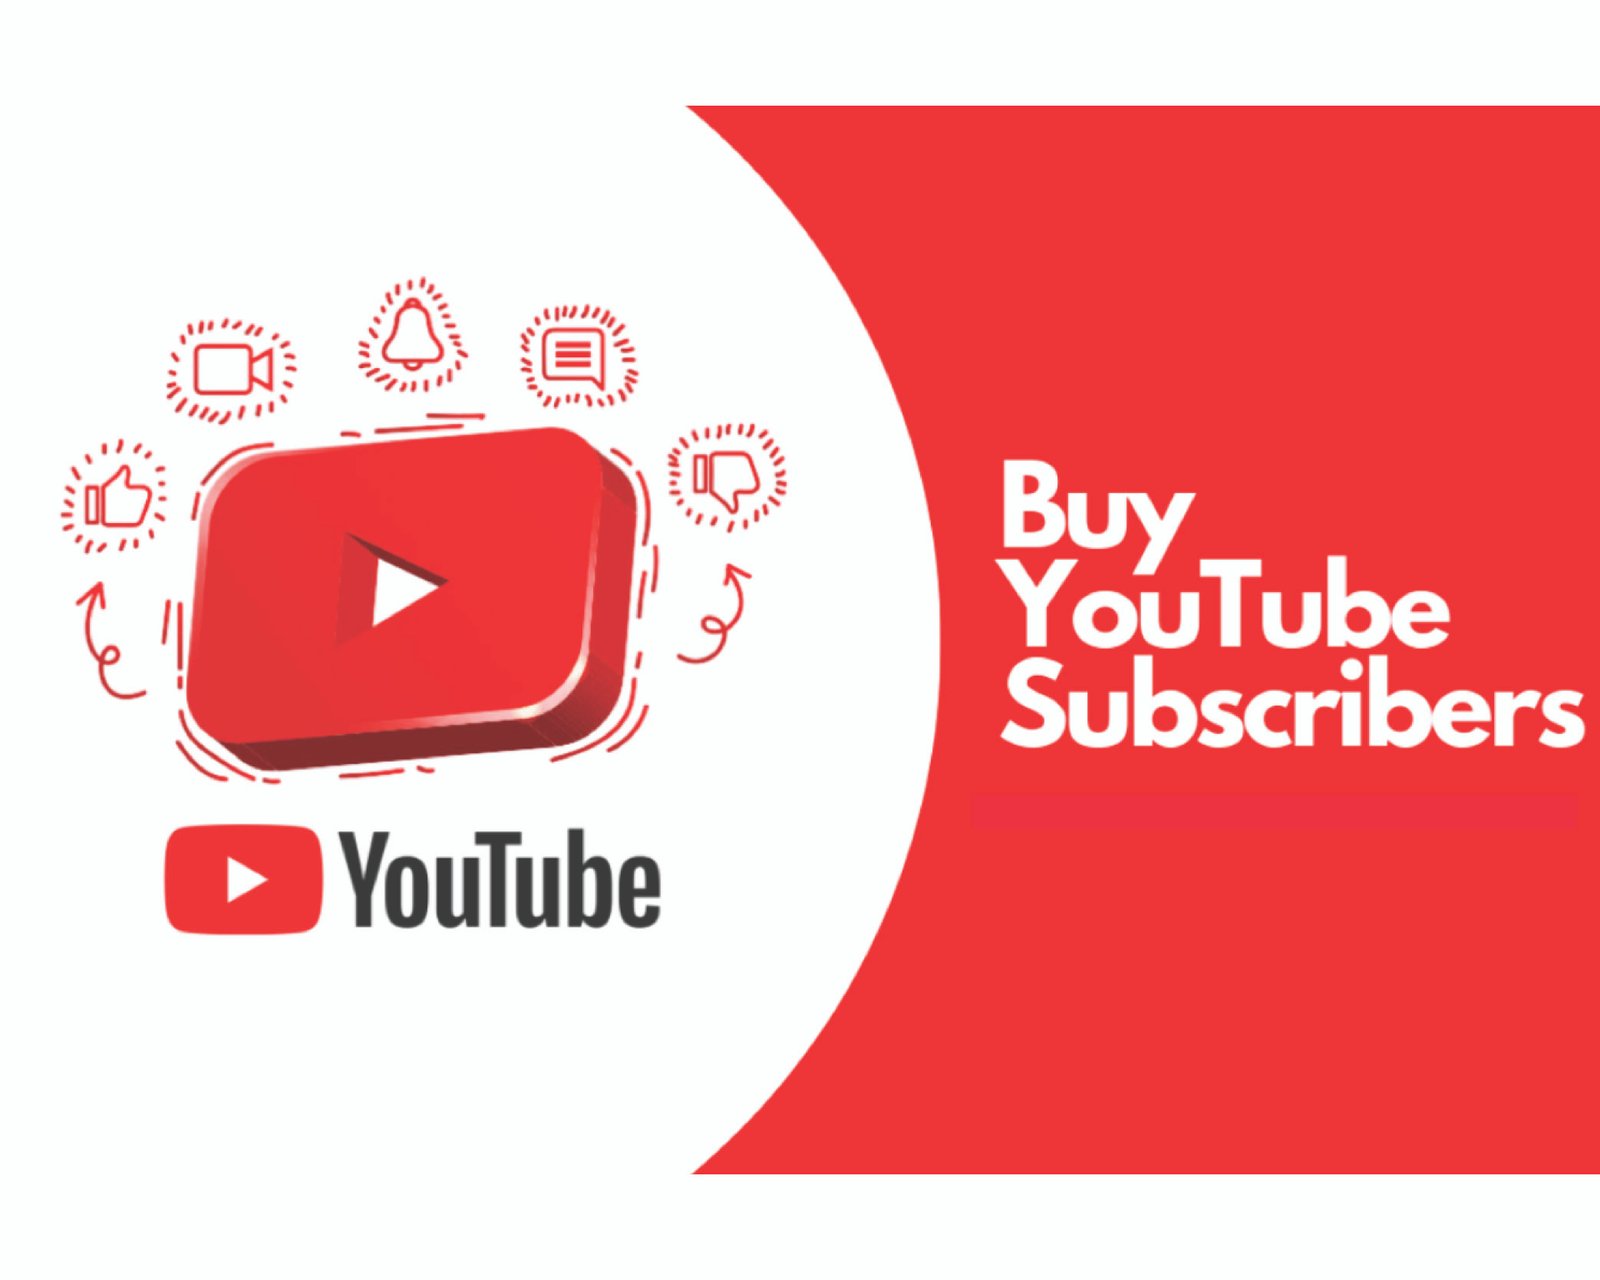 Boosting Your YouTube Presence: The Impact of Purchasing YouTube Subscribers